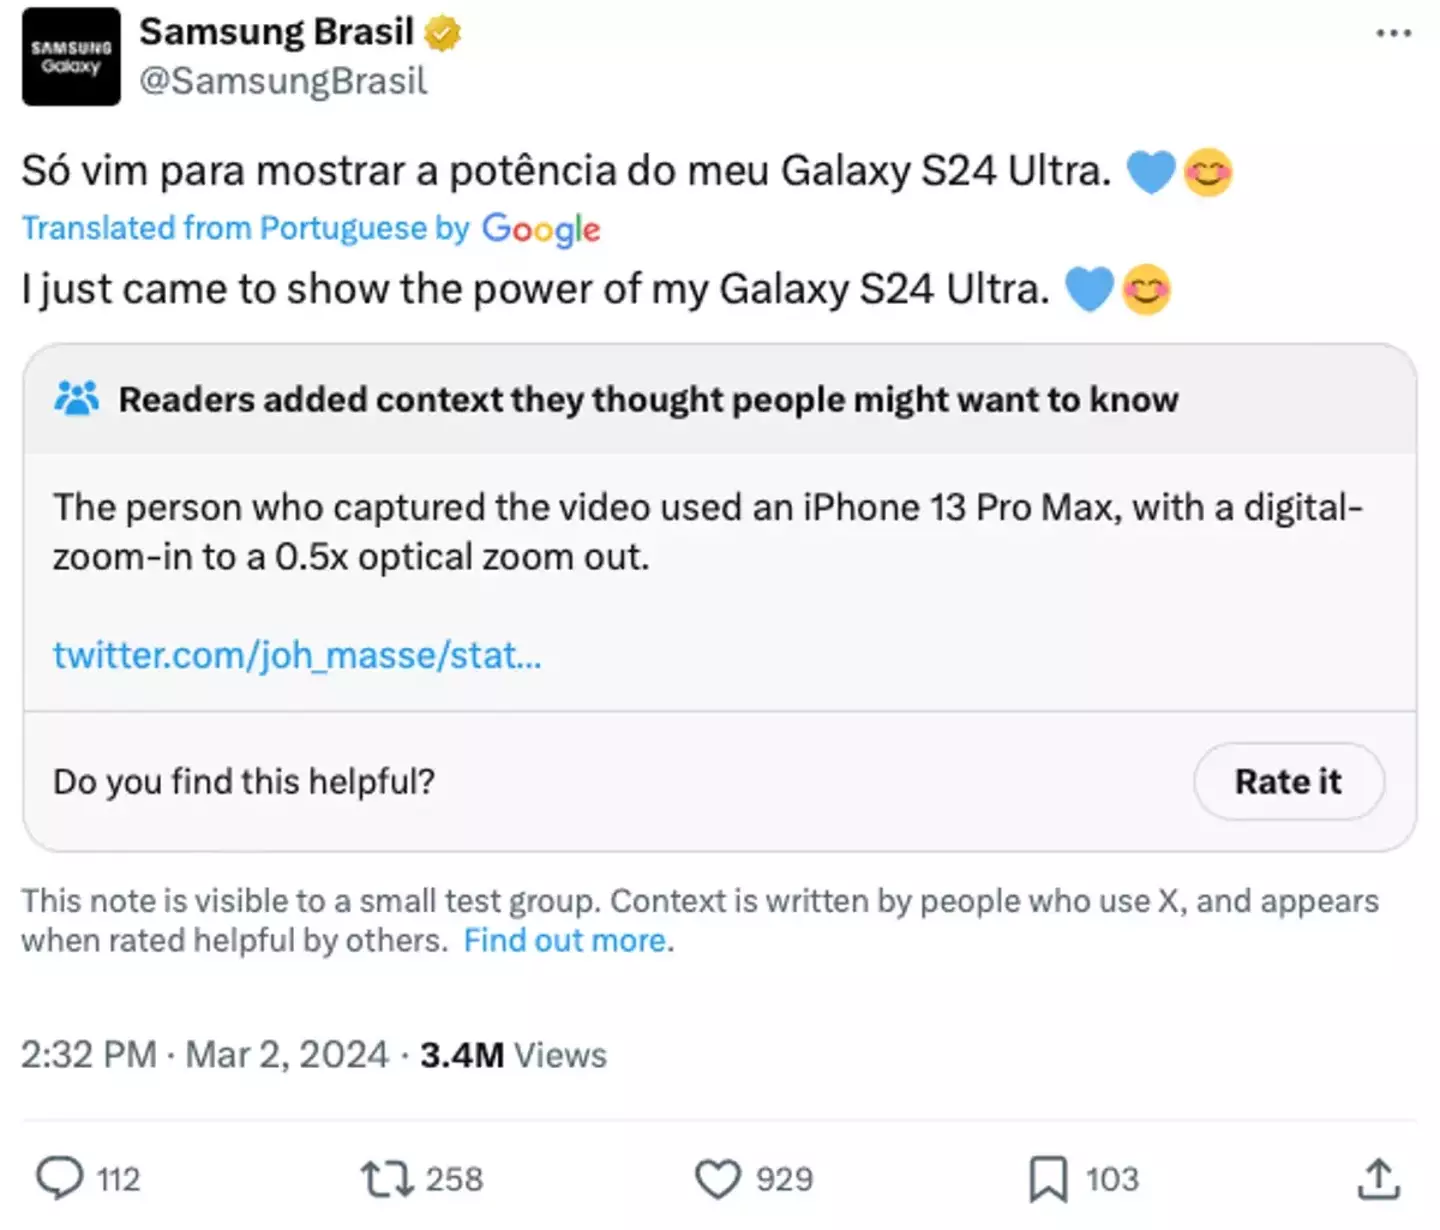 Samsung initially took credit for the video.